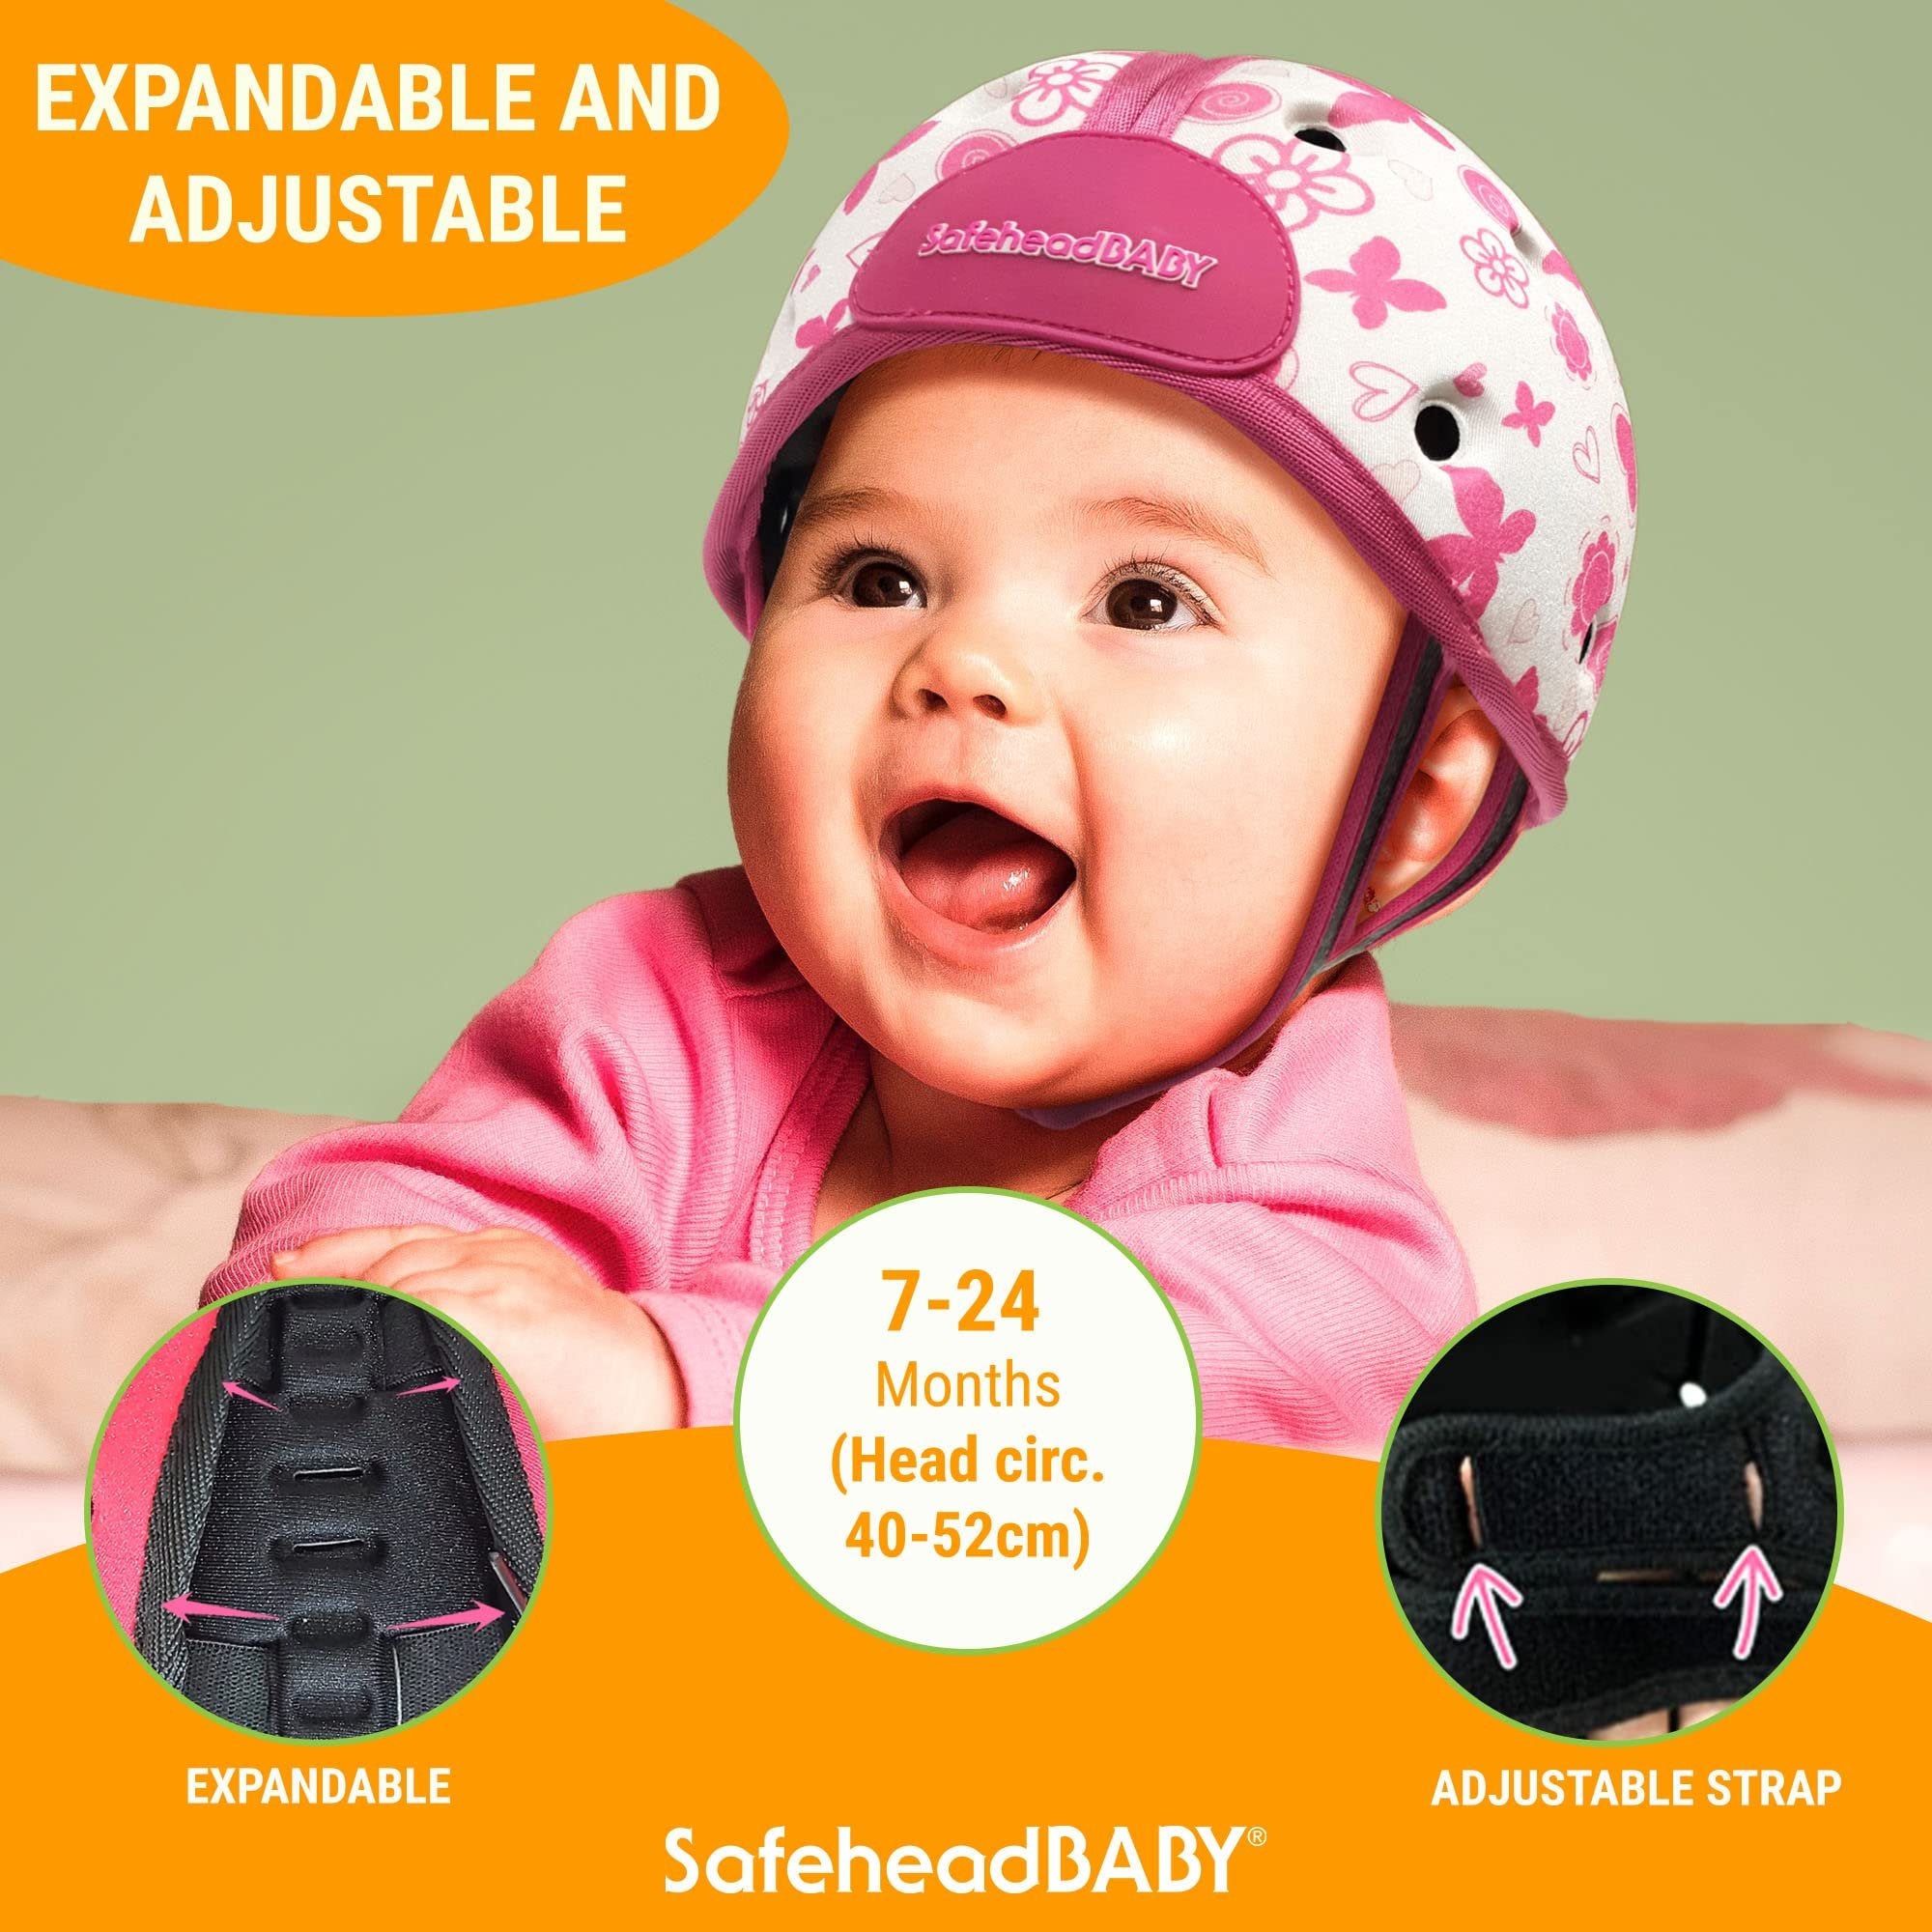 SafeheadBABY Infant Safety Helmet, Sporty Blue, Expandable & Adjustable, One Size Fits All